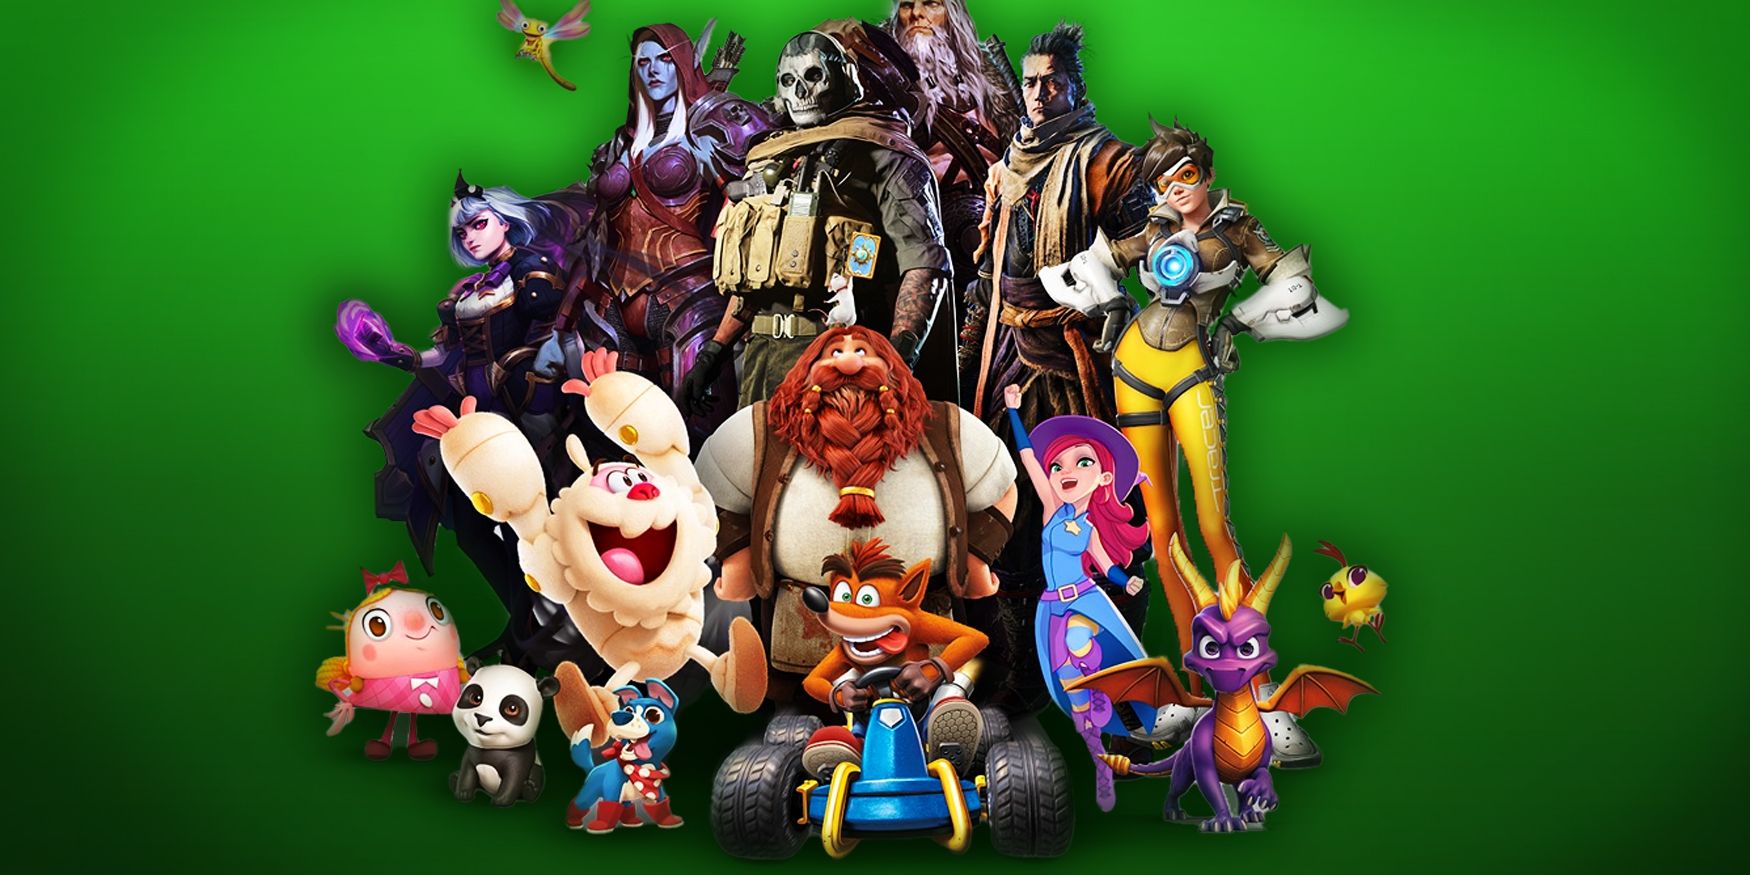 A group of Activion Blizzard characters, including Ghost from Call of Duty, Spyro, Crash Bandicoot, and Tracer from Overwatch on an Xbox-green background.